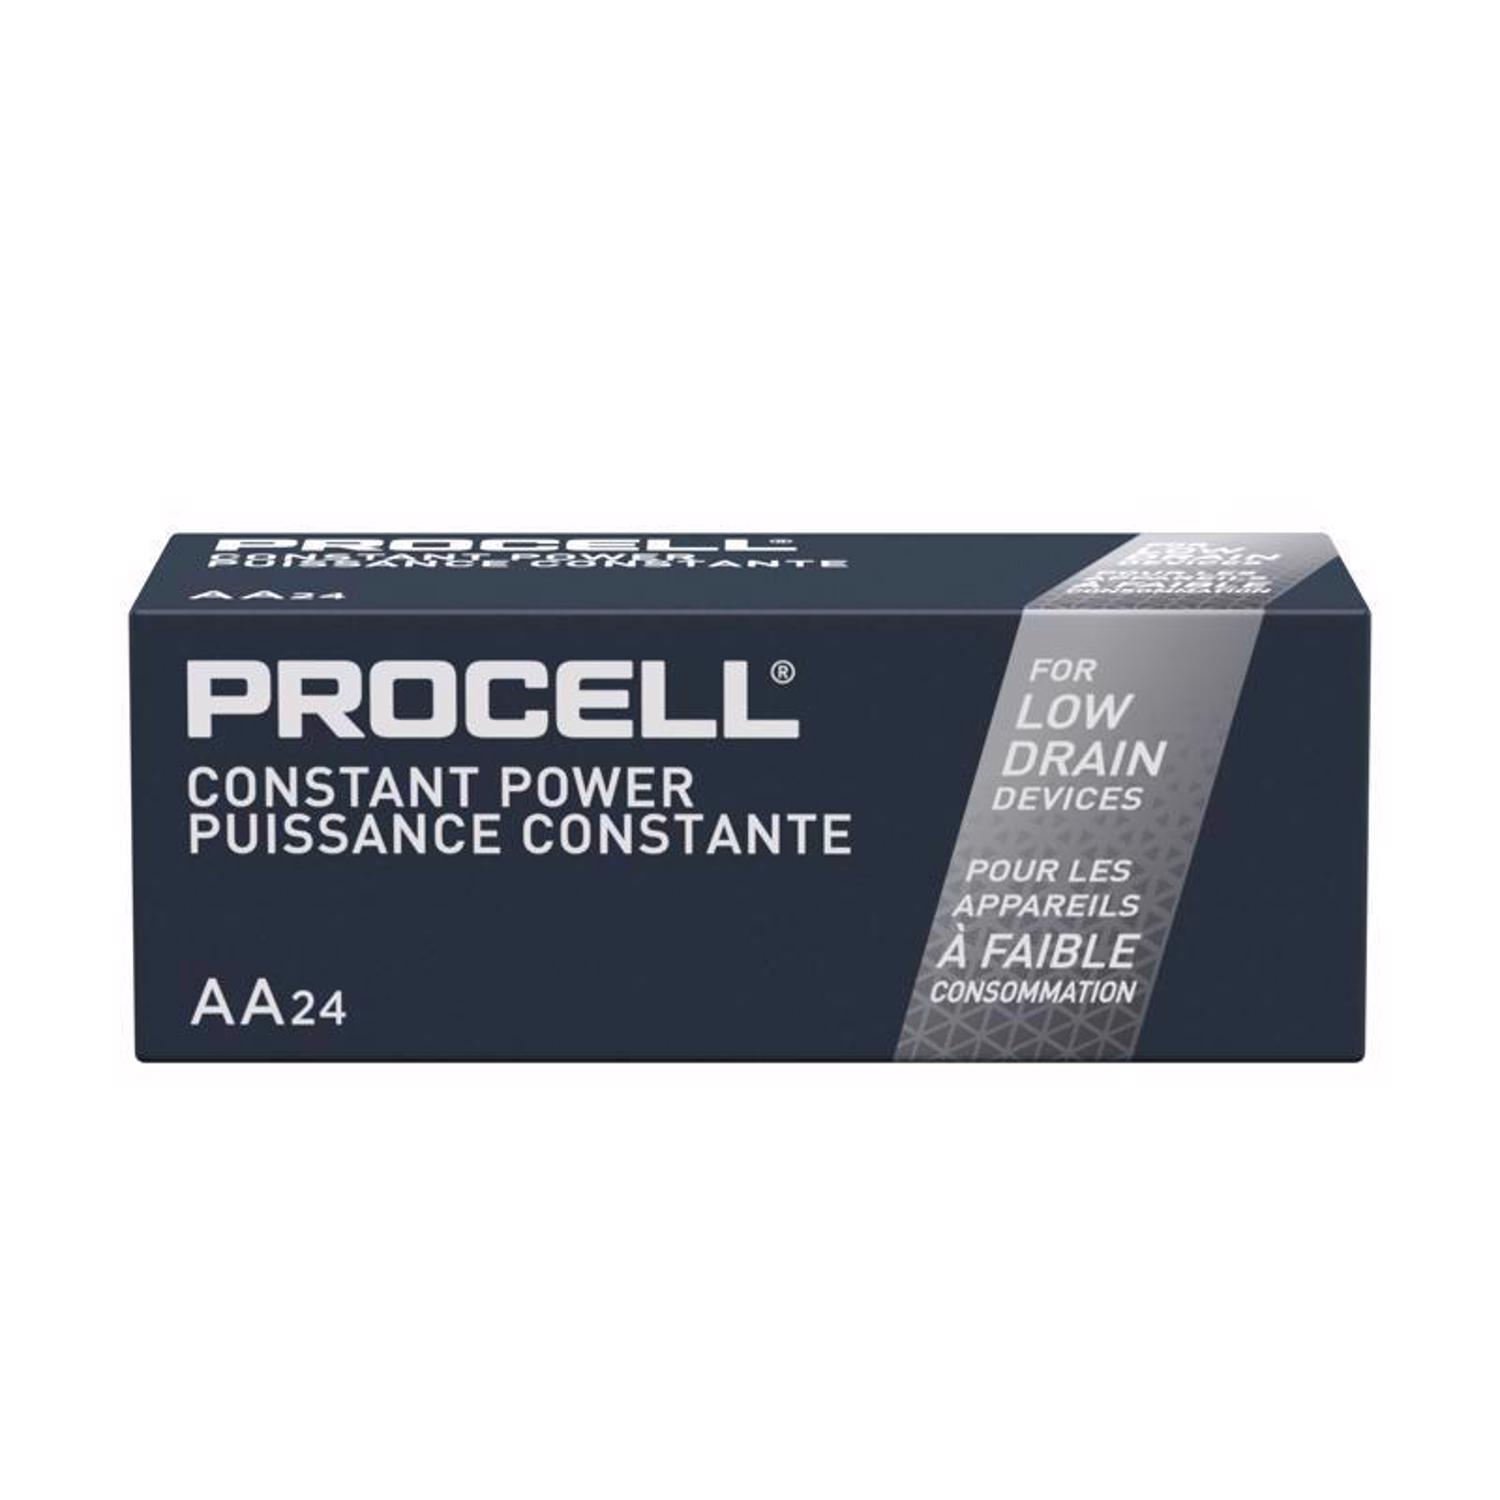 Photos - Household Switch Procell Constant AA Alkaline Batteries 24 pk Boxed PC1500